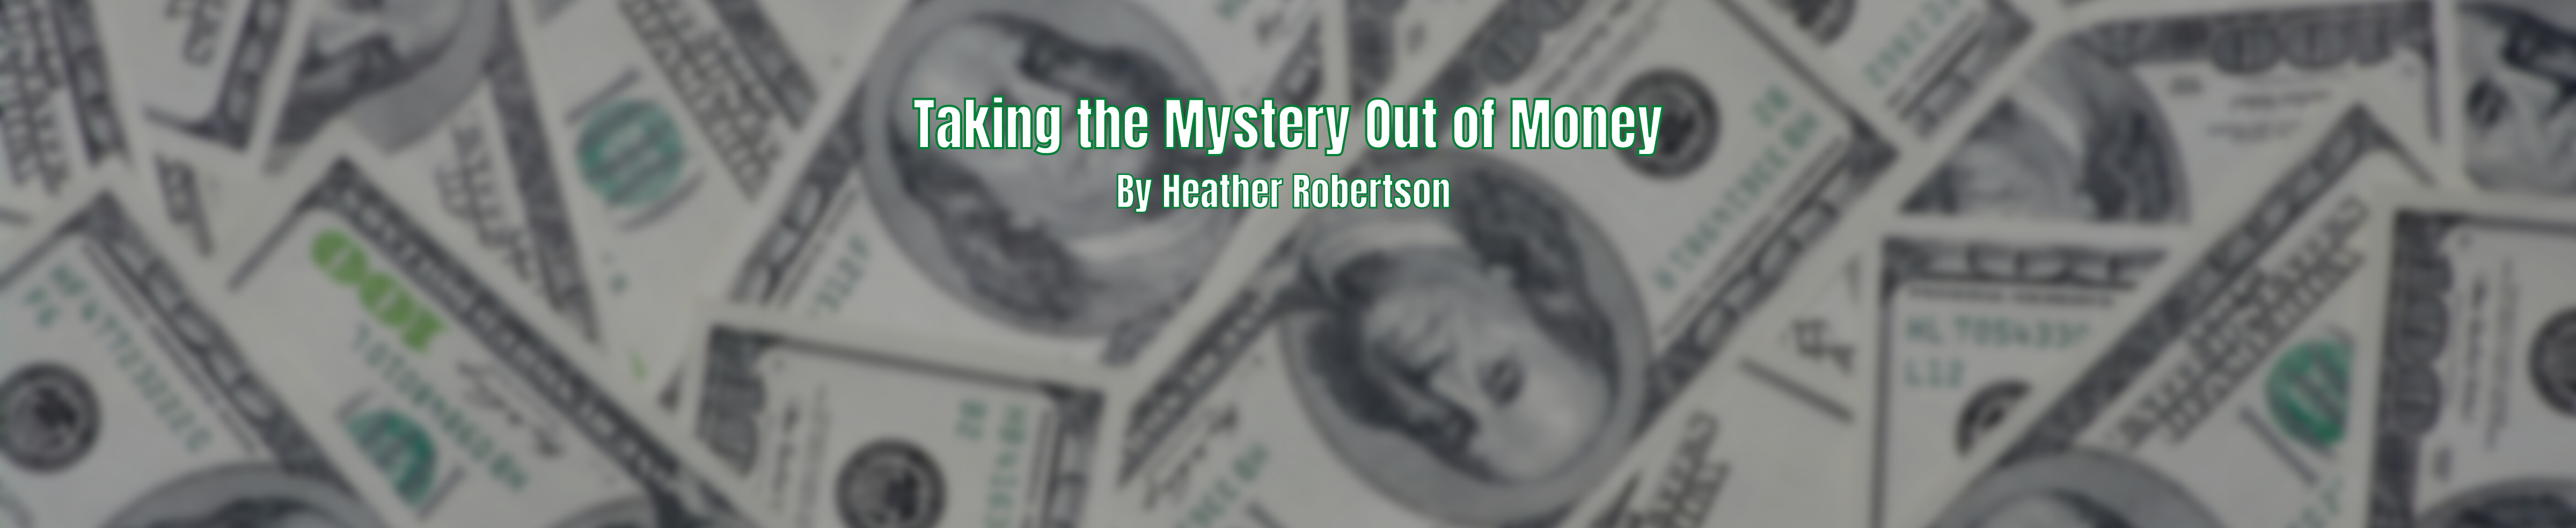 taking the mystery out of money